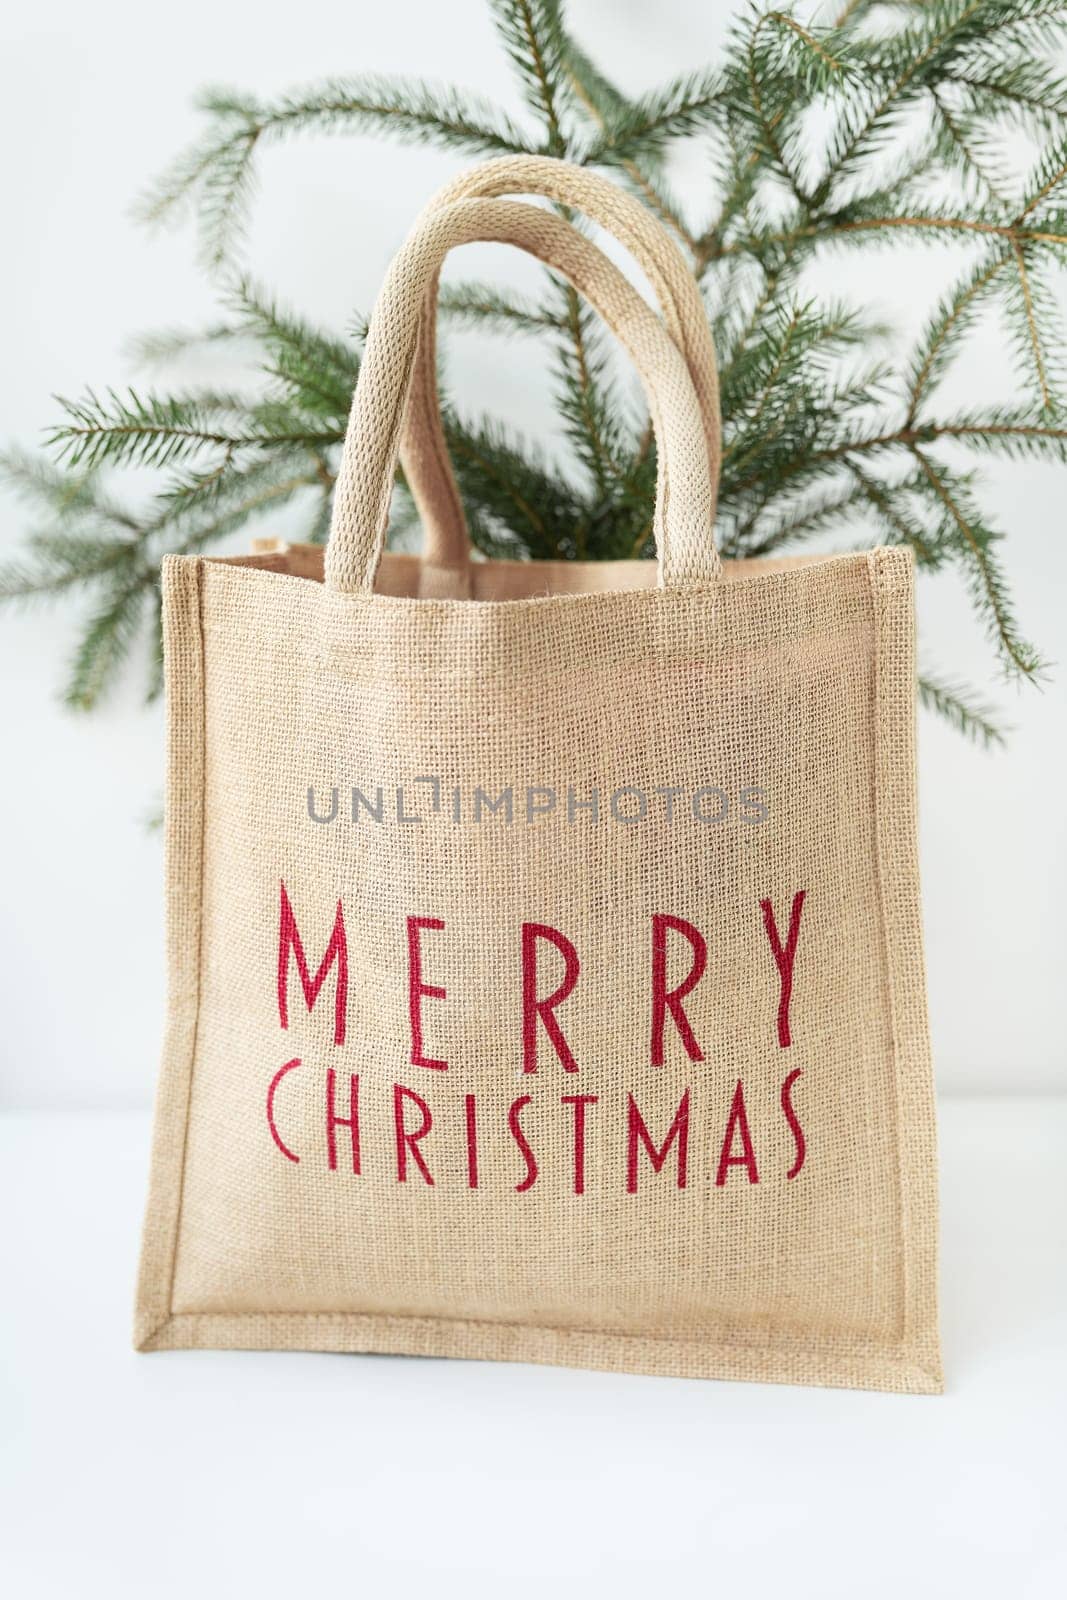 This is a photo of a burlap tote bag with Merry Christmas written in red on it, sitting in front of a small Christmas tree. by sfinks